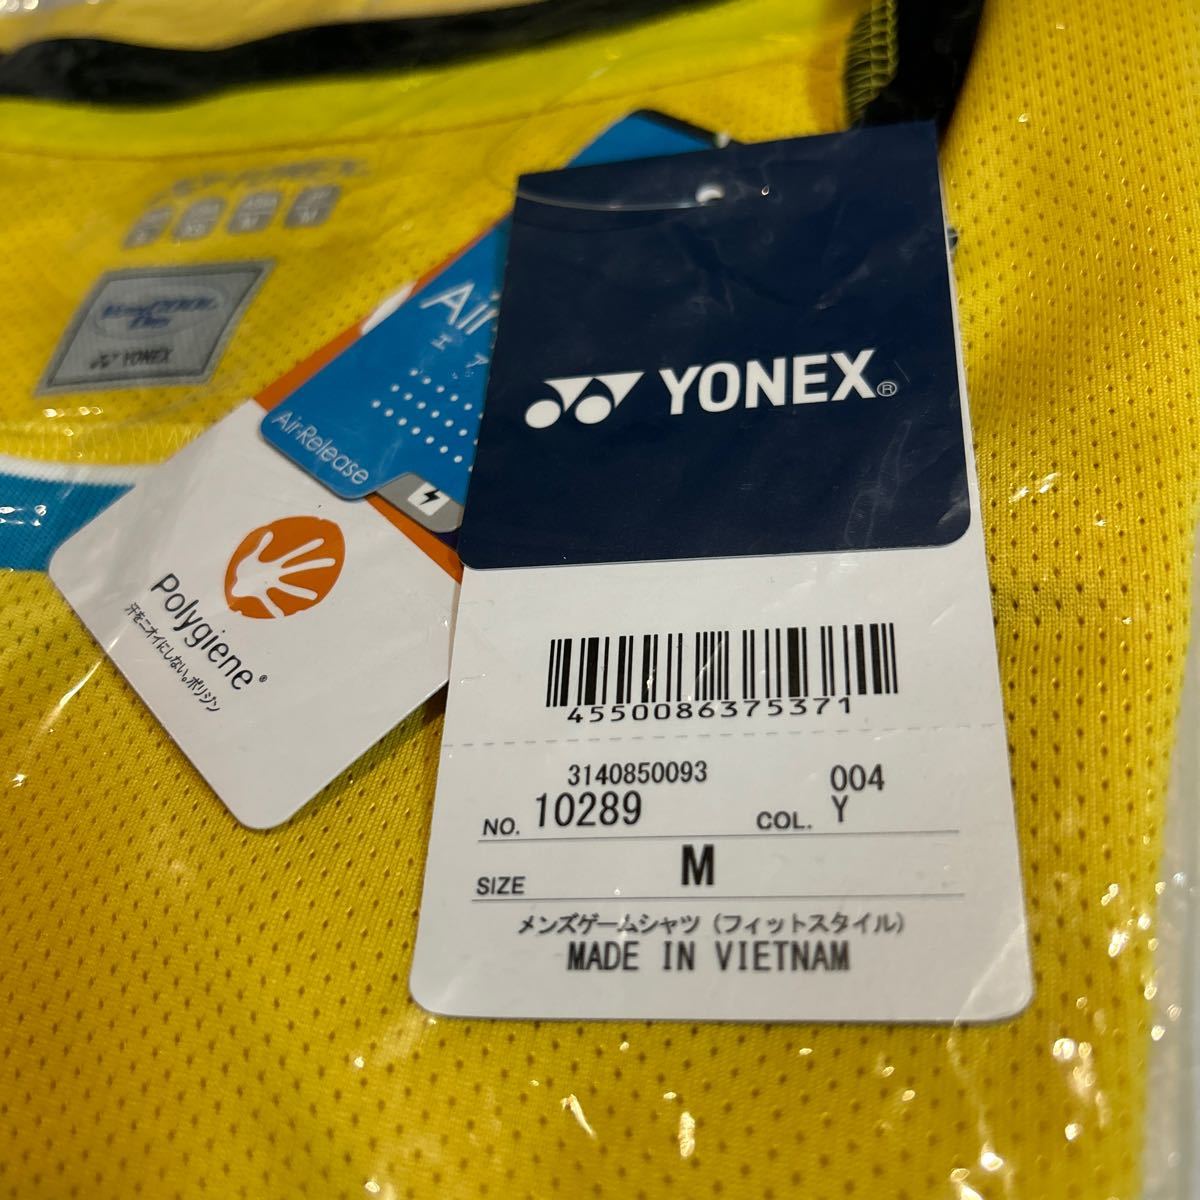  free shipping Yonex men's game shirt M size 2 pieces set limited amount popular air Release po Rige n installing be leak -ru dry uniform 